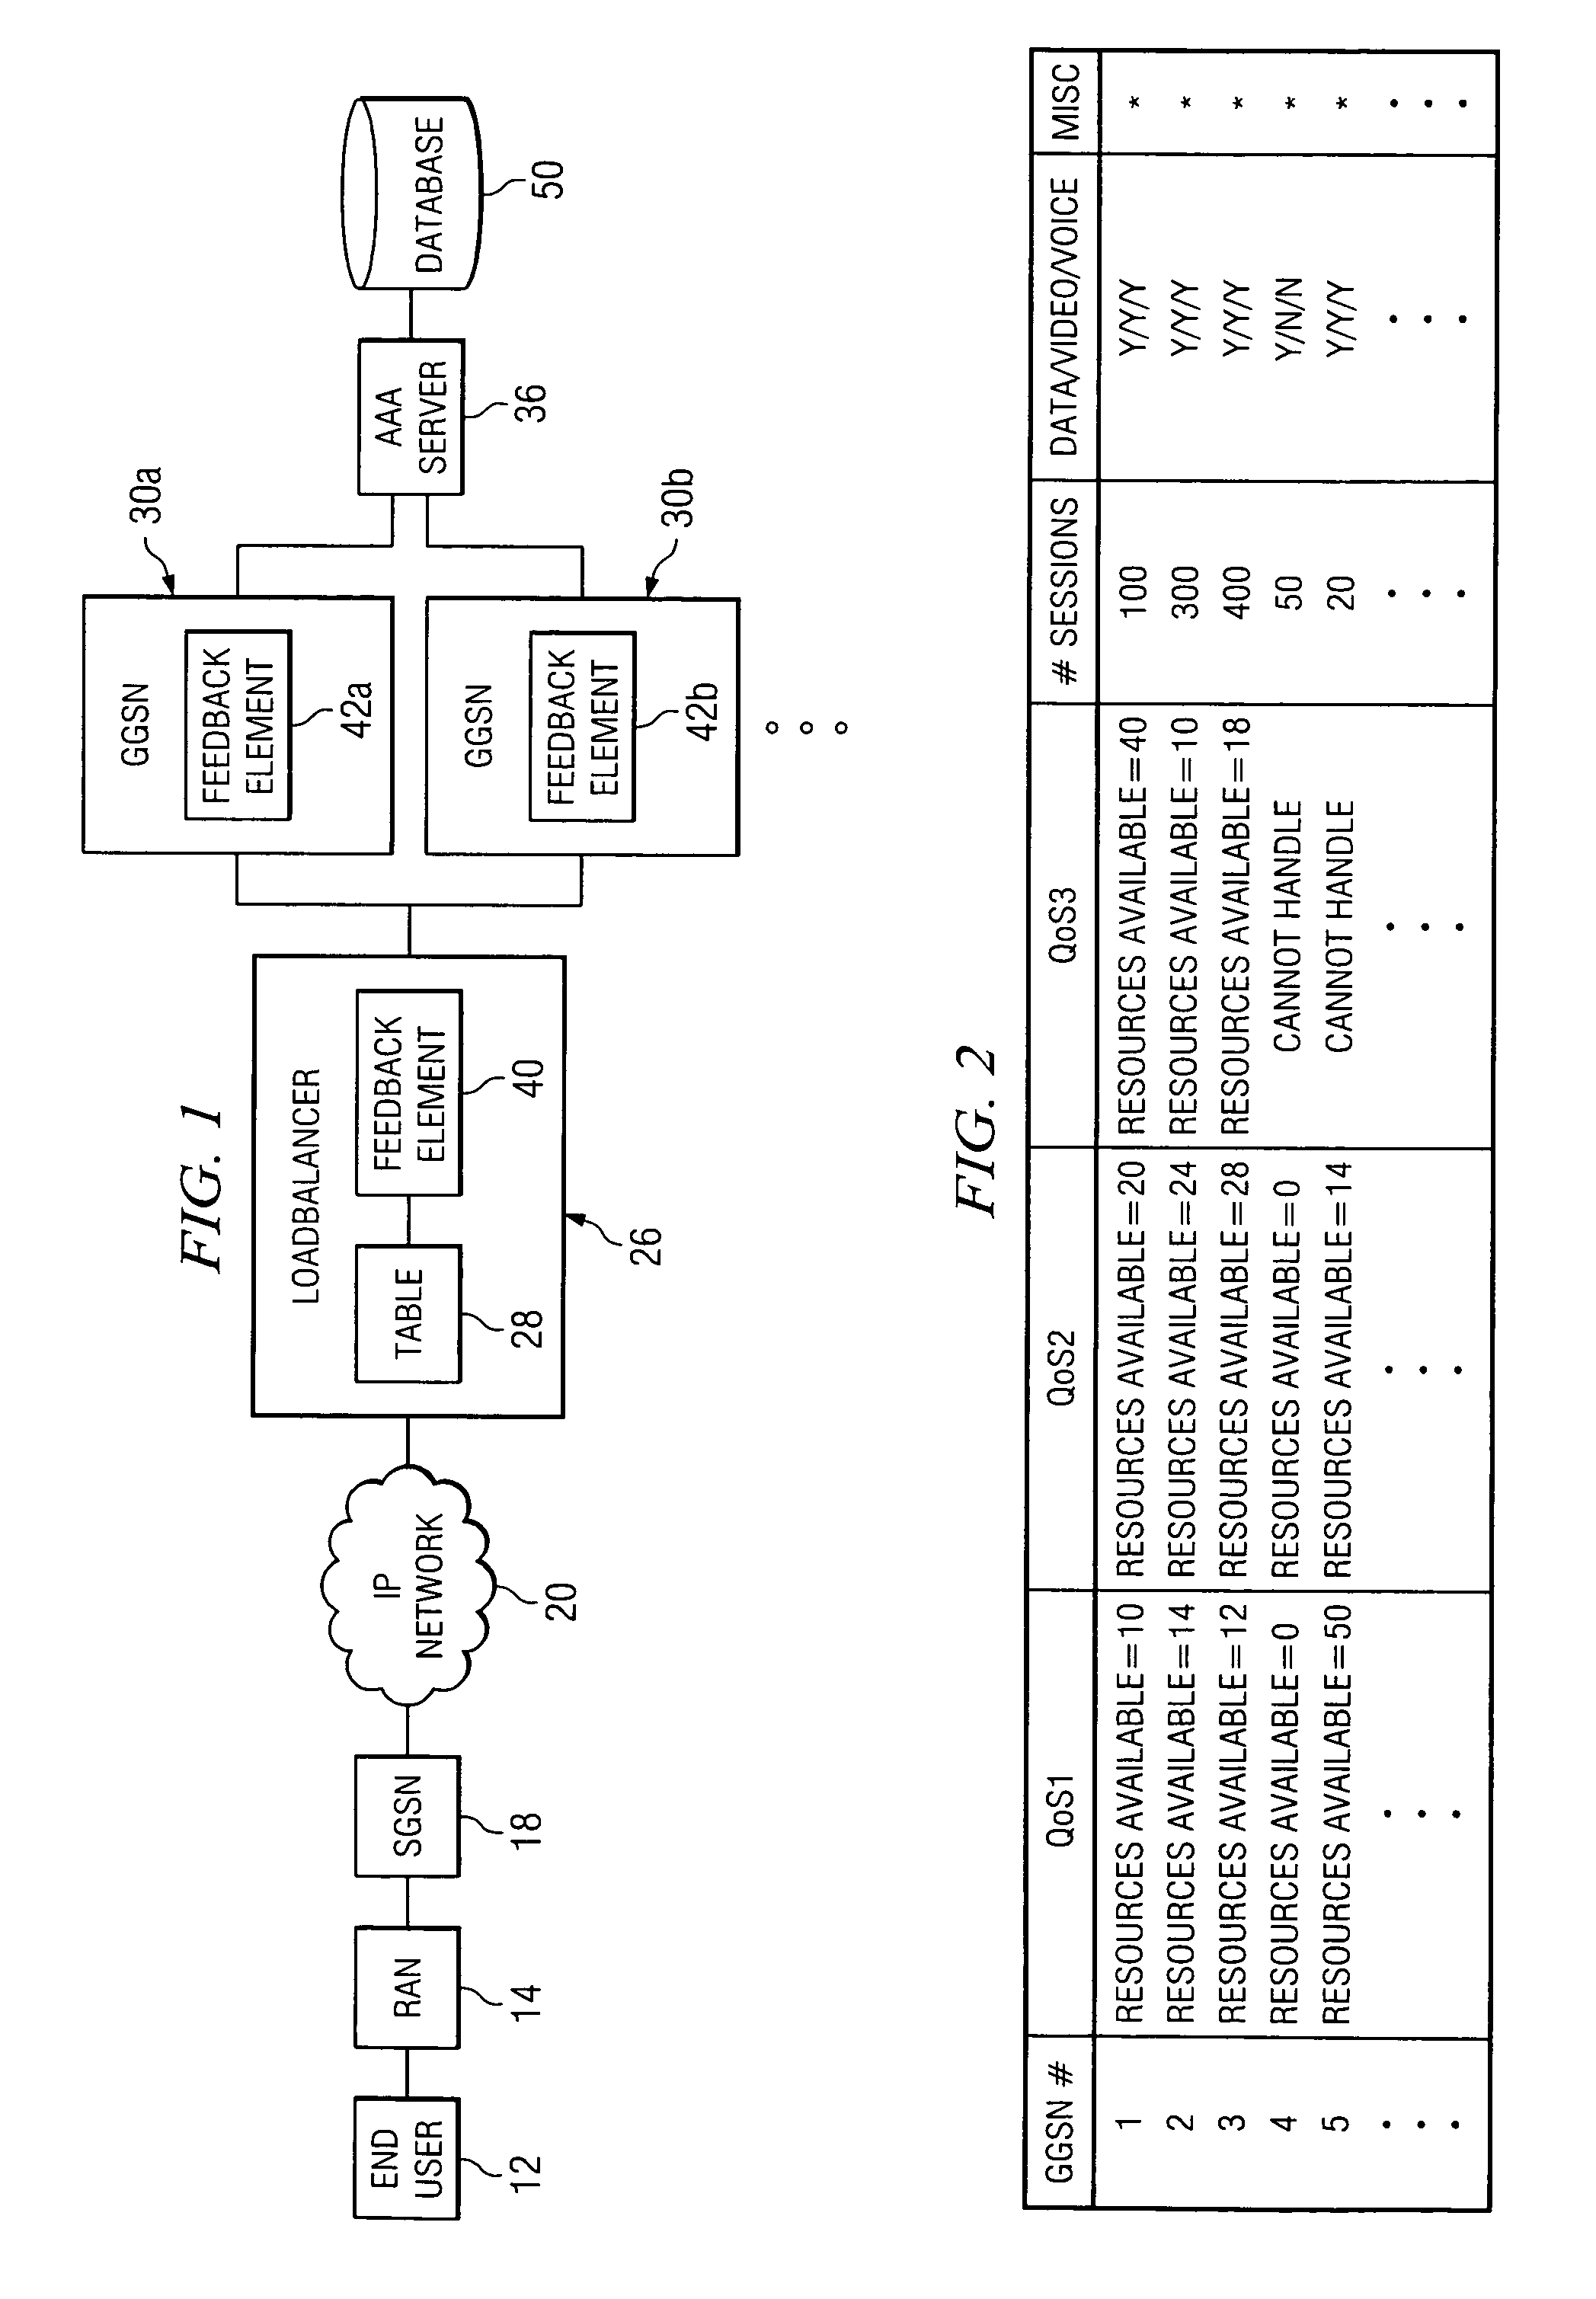 System and method for loadbalancing in a network environment using feedback information